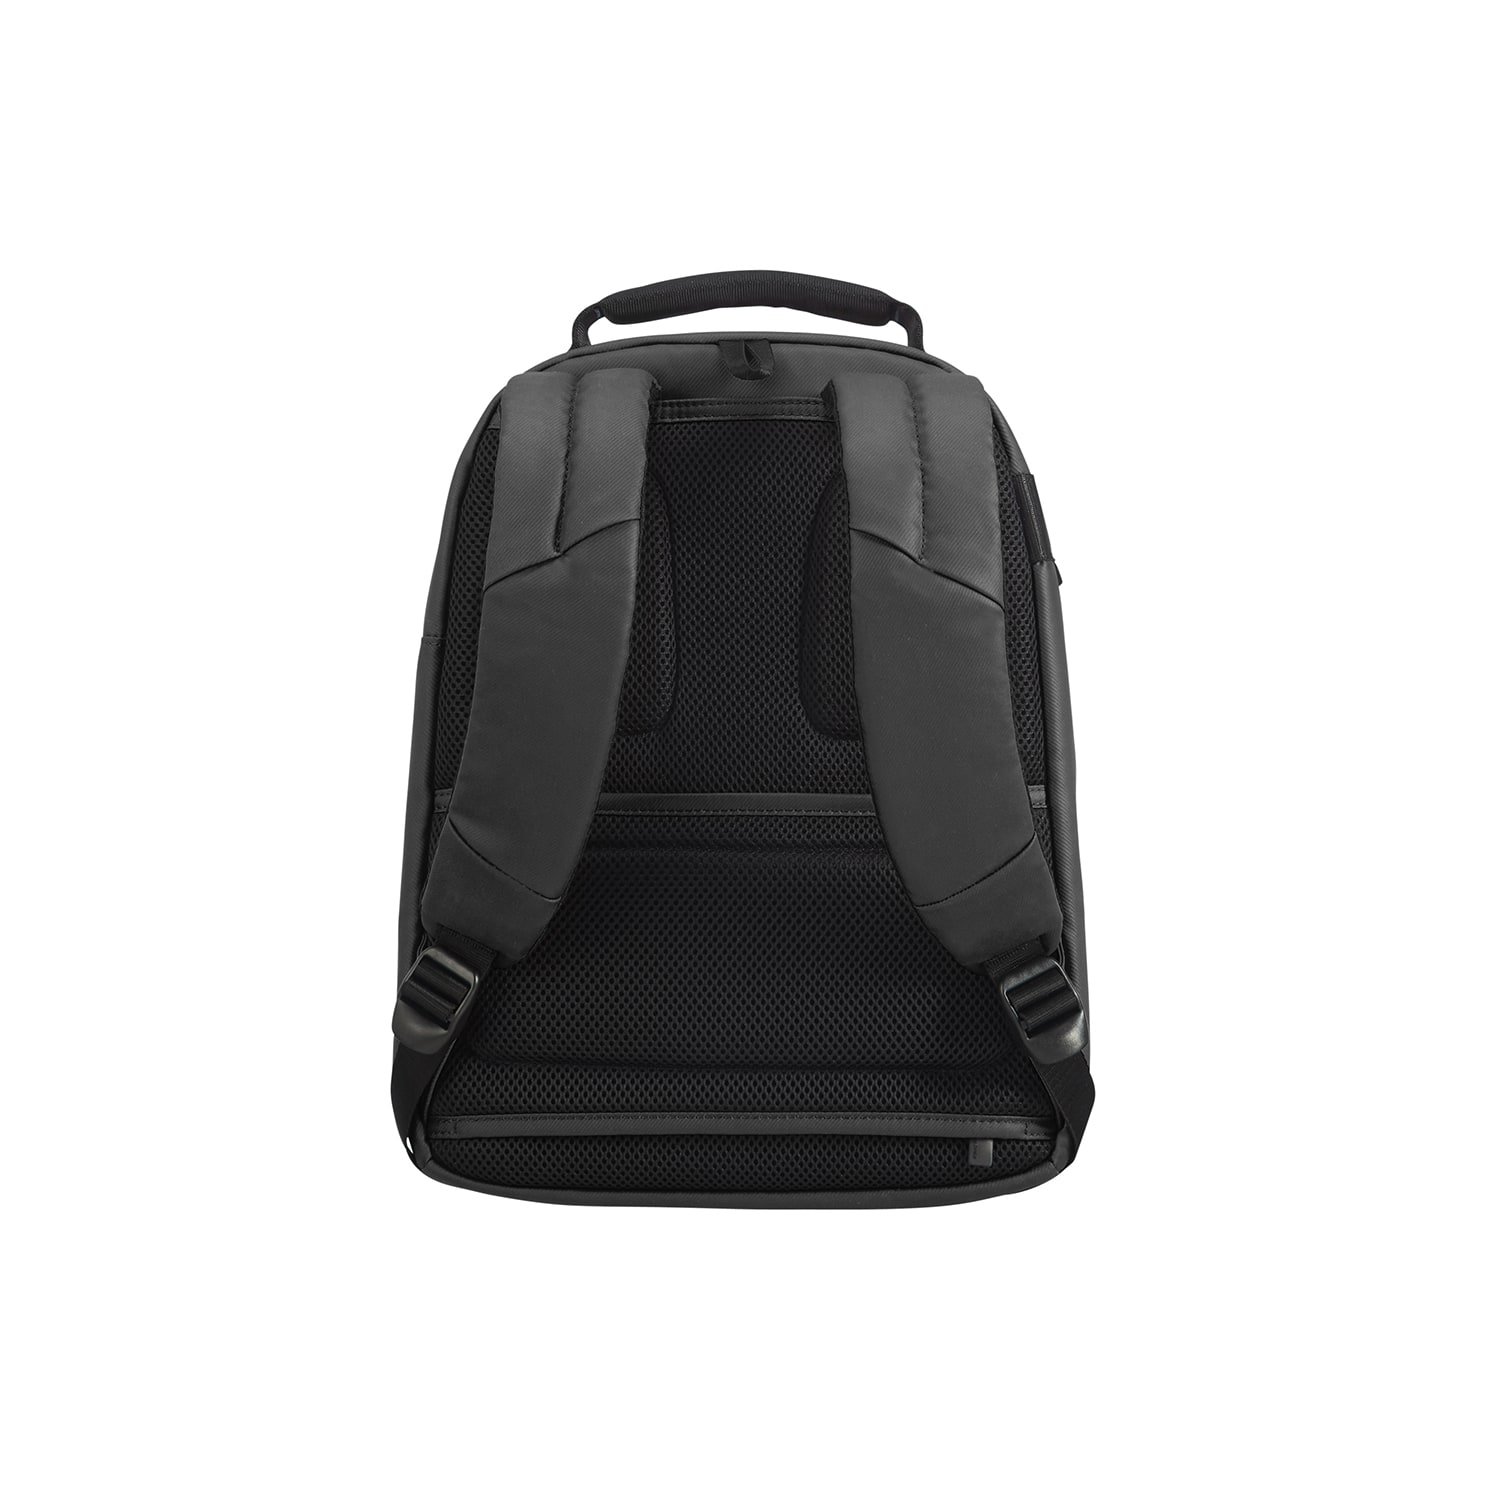 CITYVIBE 2.0-SMALL CITY BACKPACK SCM7-008-SF000*09